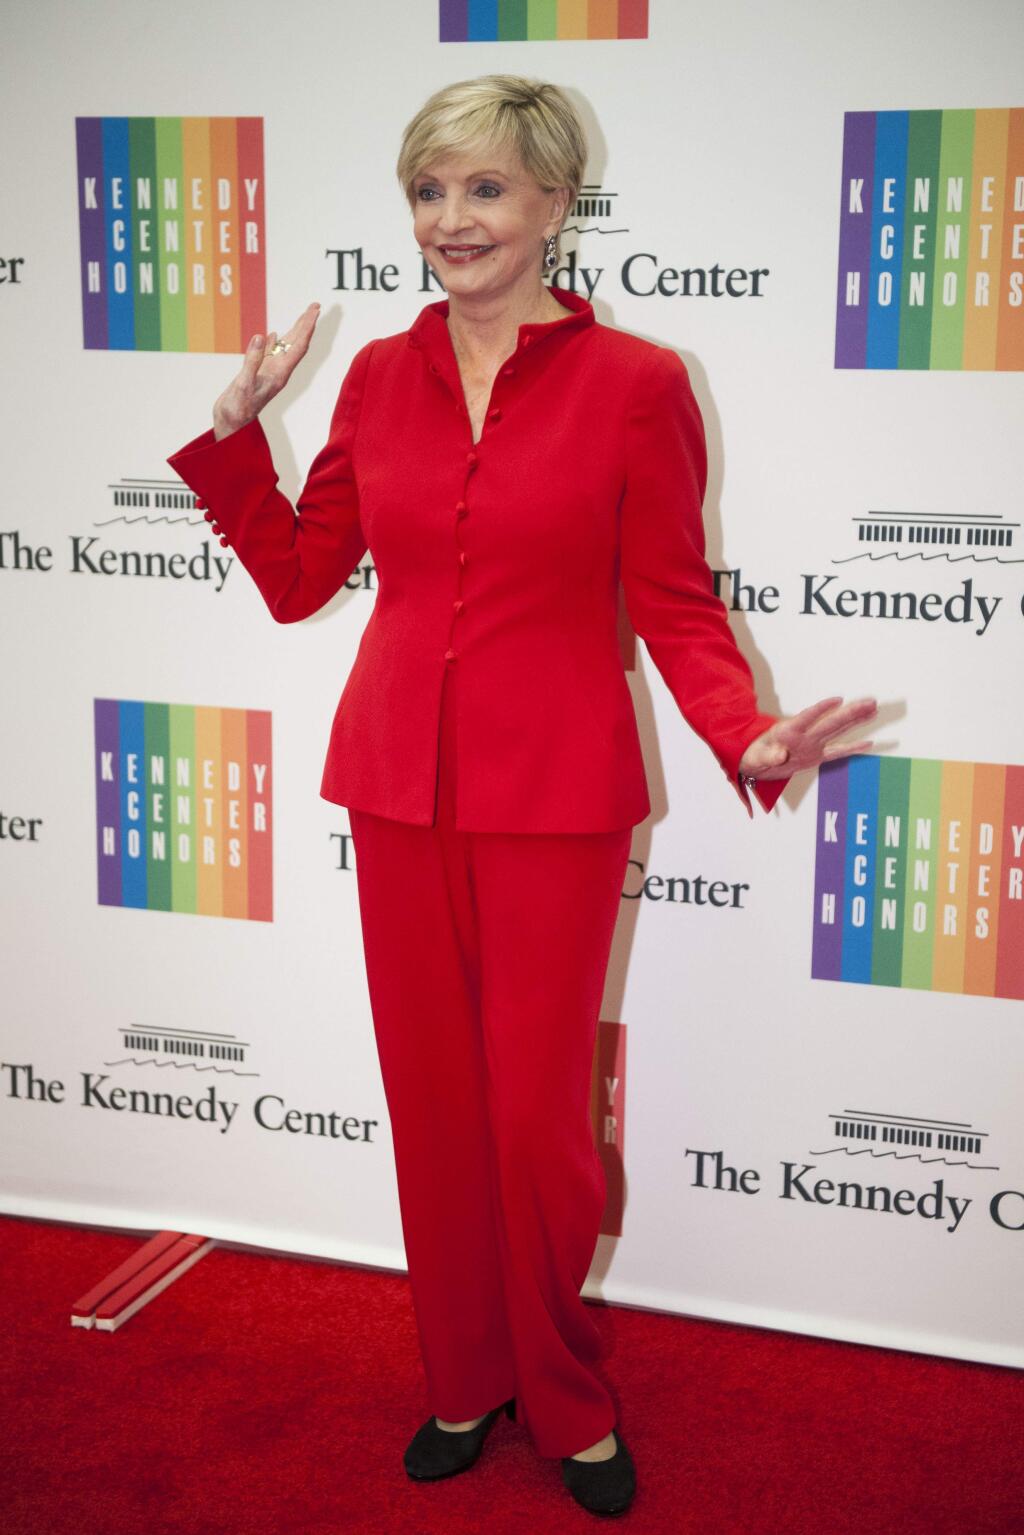 Florence Henderson poses for photos on the red carpet at the State Department Dinner for the Kennedy Center Honors on Saturday, Dec. 6, 2014 at the State Department in Washington. (AP Photo/Kevin Wolf)